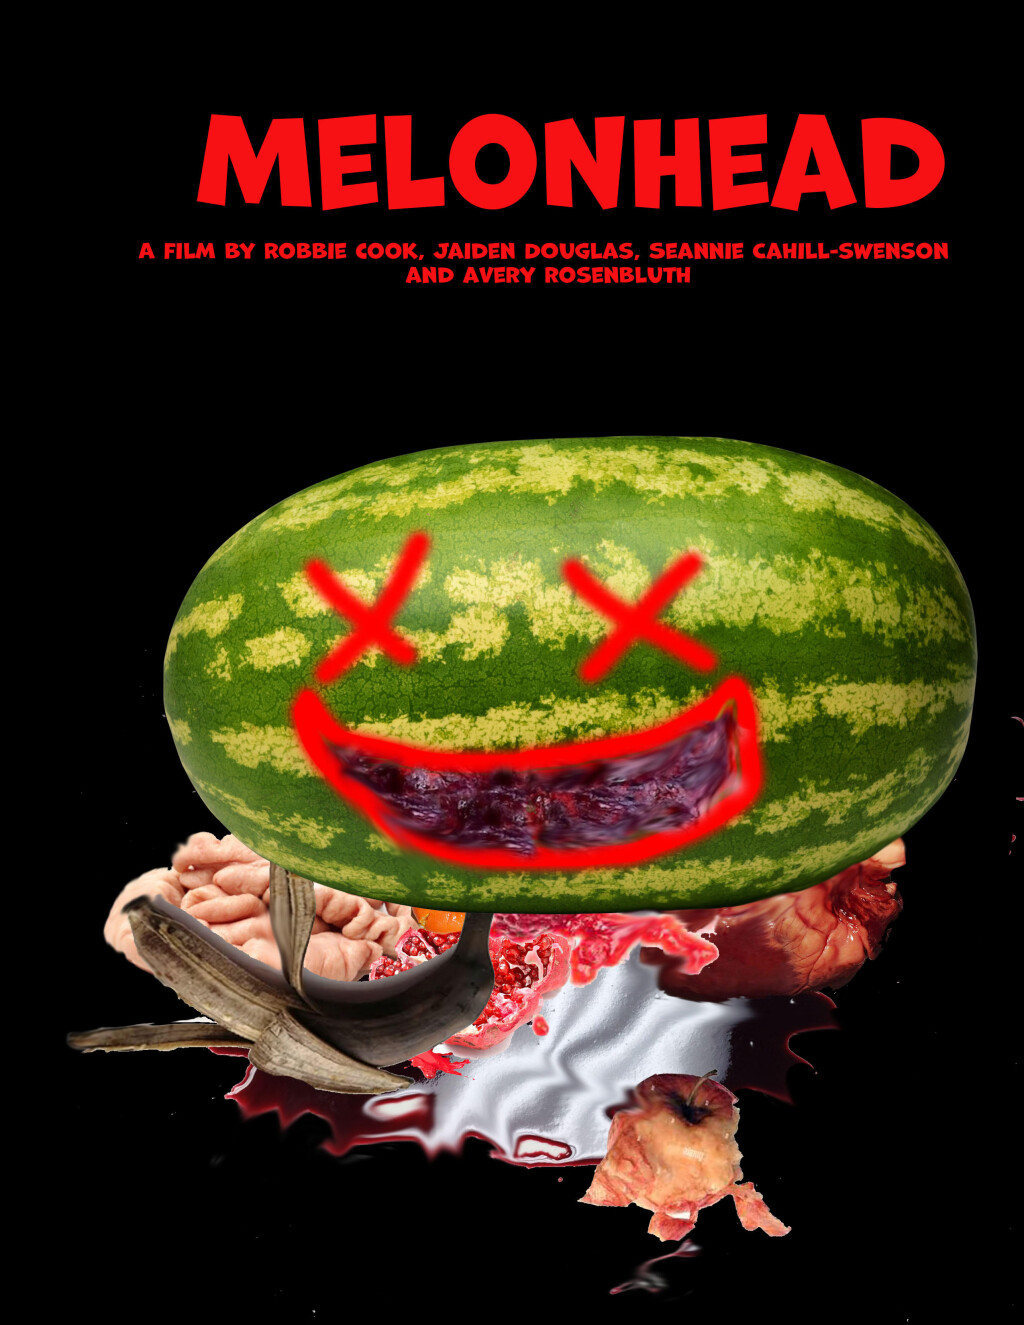 Filmposter for Melonhead